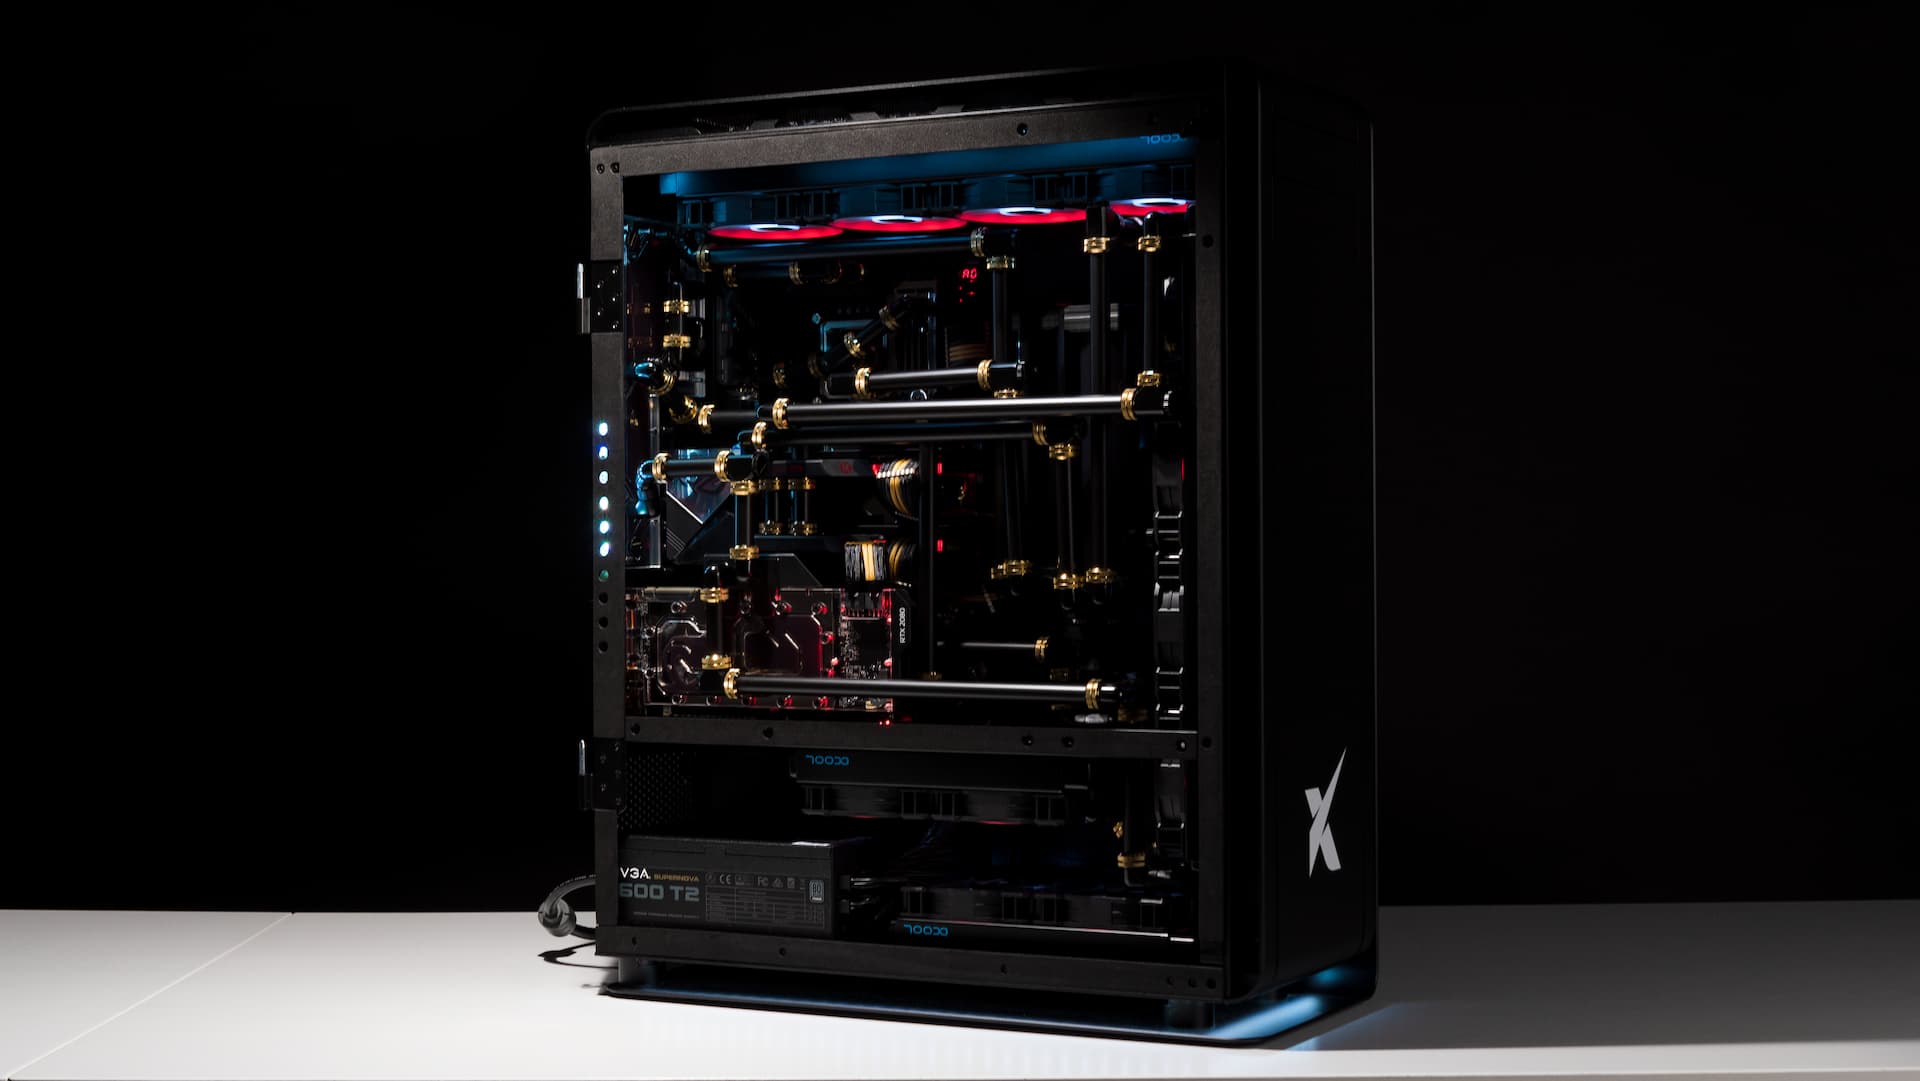 Do you deserve a little something special for surviving this past year? We think so. How about a custom gaming PC at Xidax?